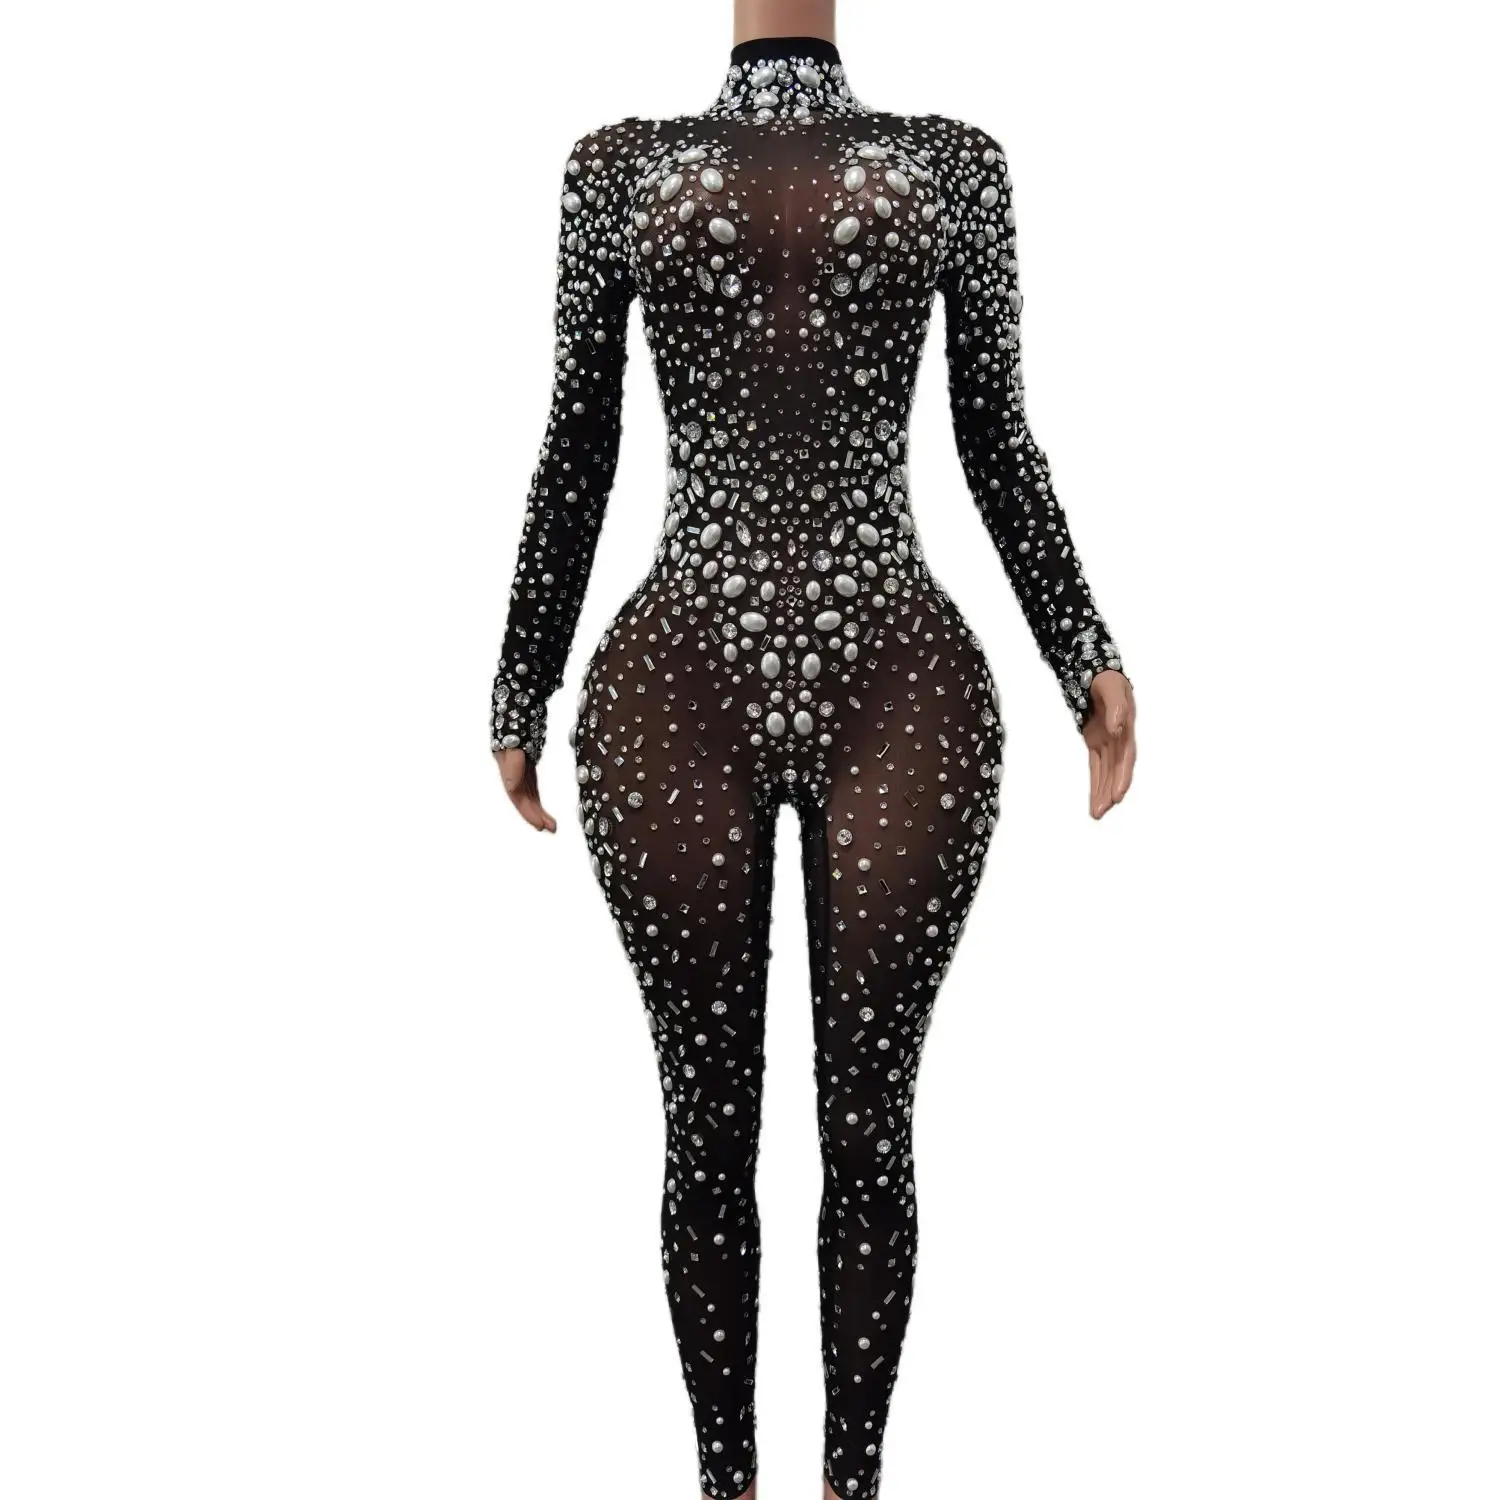 

Women Stage Big Pearls Rhinestones Stretchy Transparent Jumpsuit Evening Birthday Celebrate Outfit Sexy Dancer Bodysuit Tiaoliao